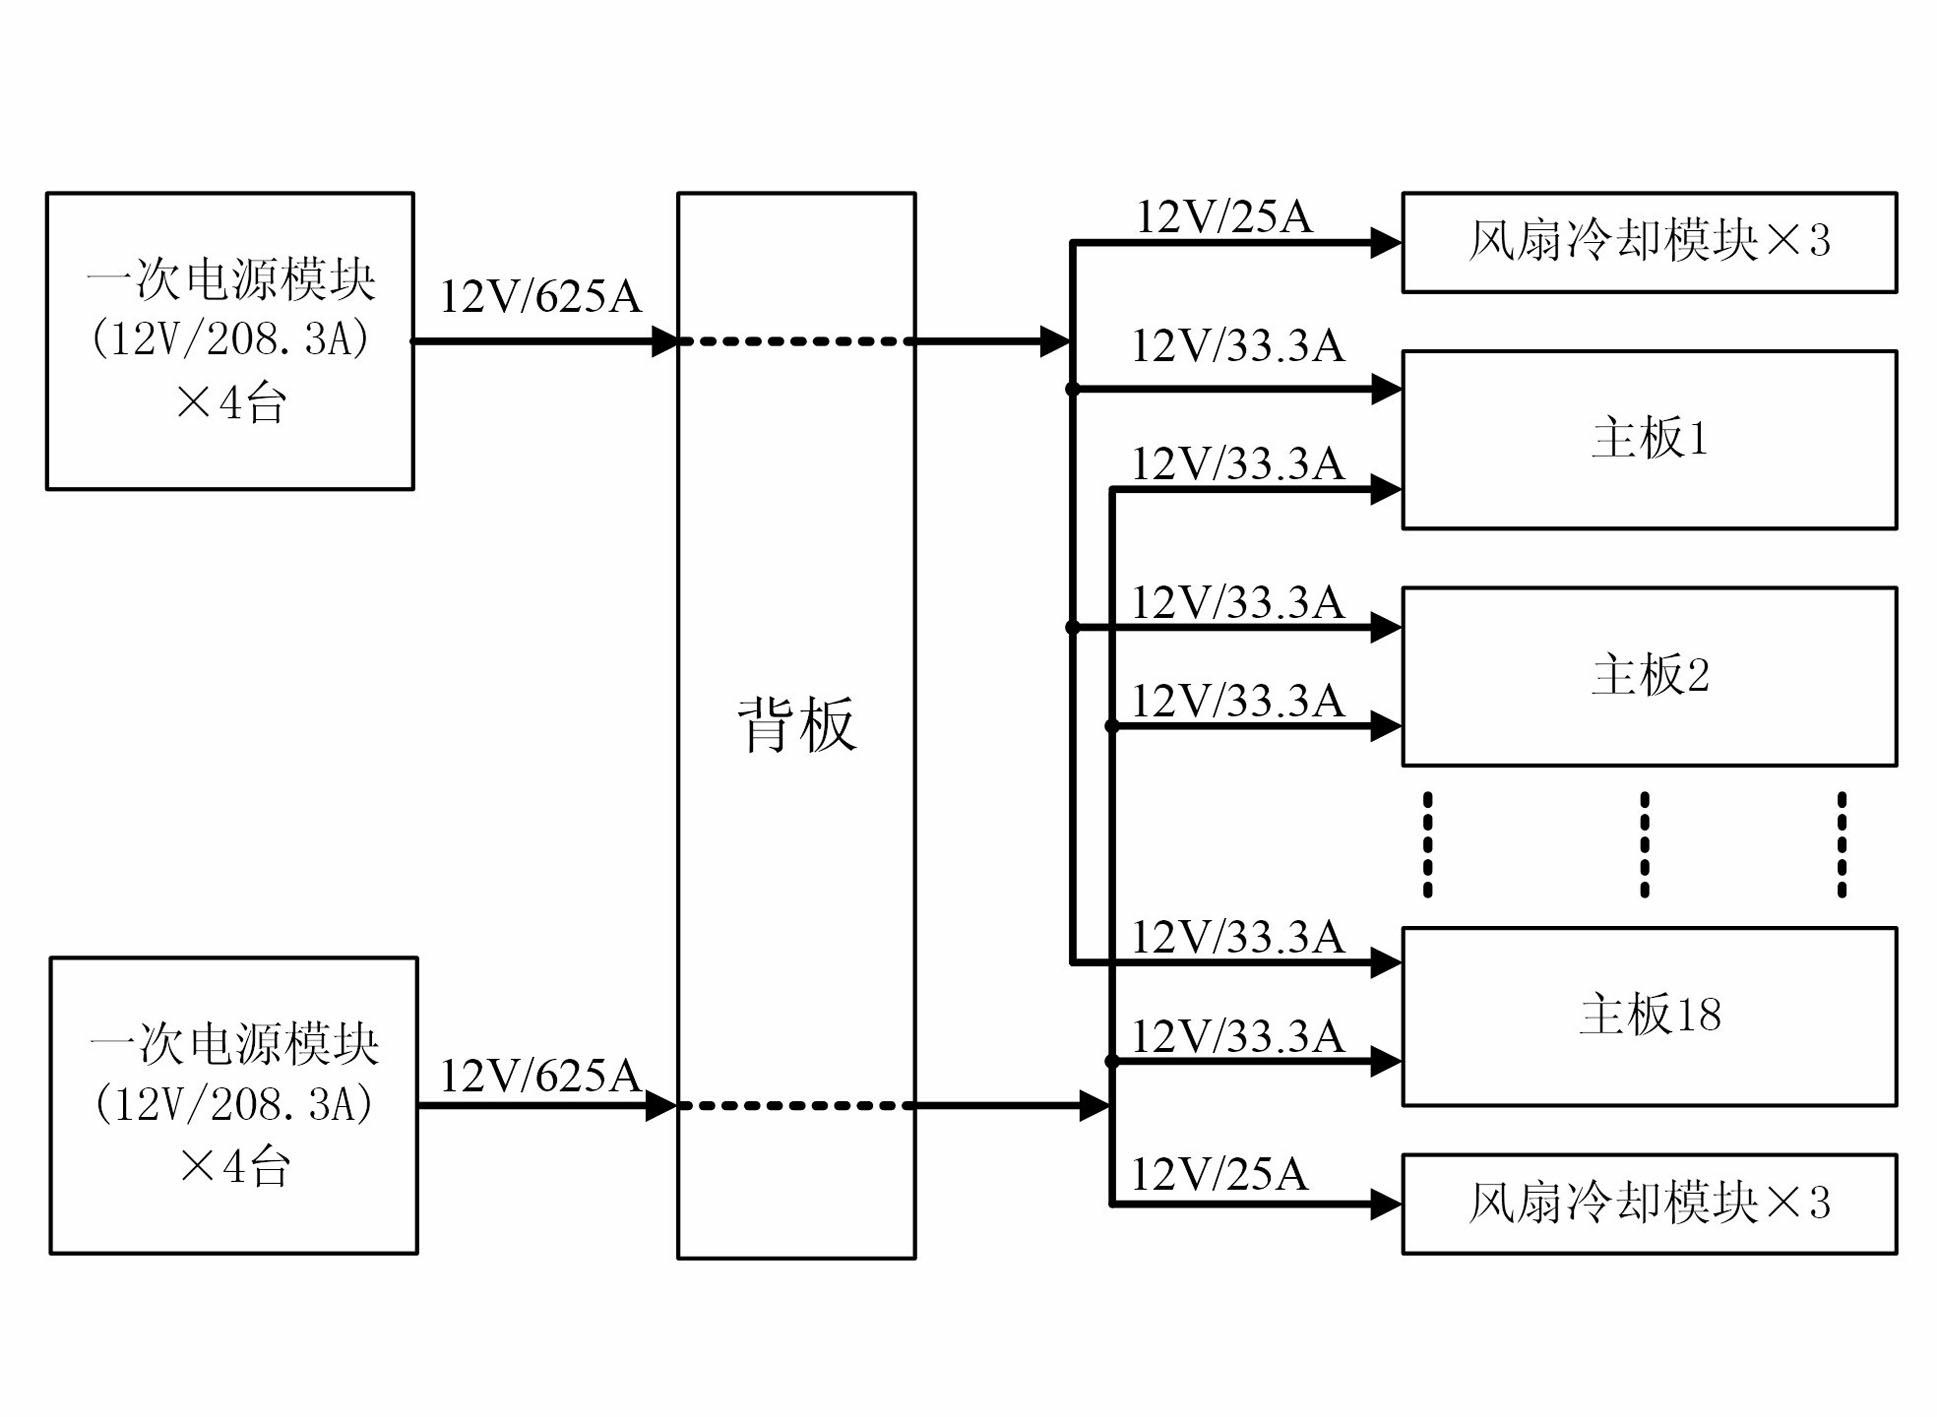 Power supply system of high-performance computer